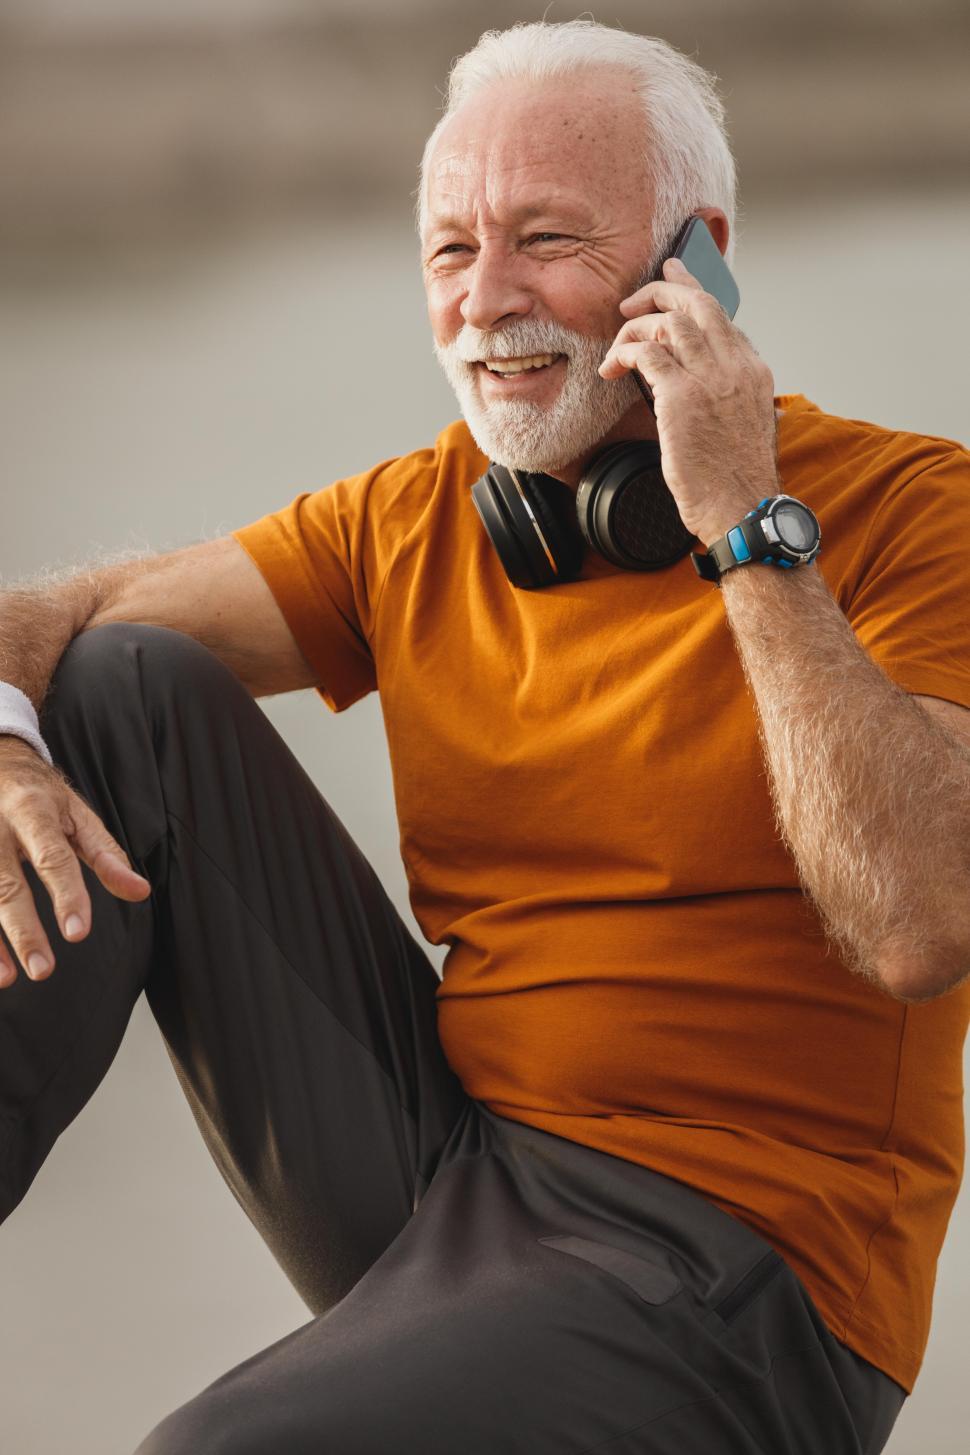 Free Image of Senior man with headphones on neck talking on mobile phone 